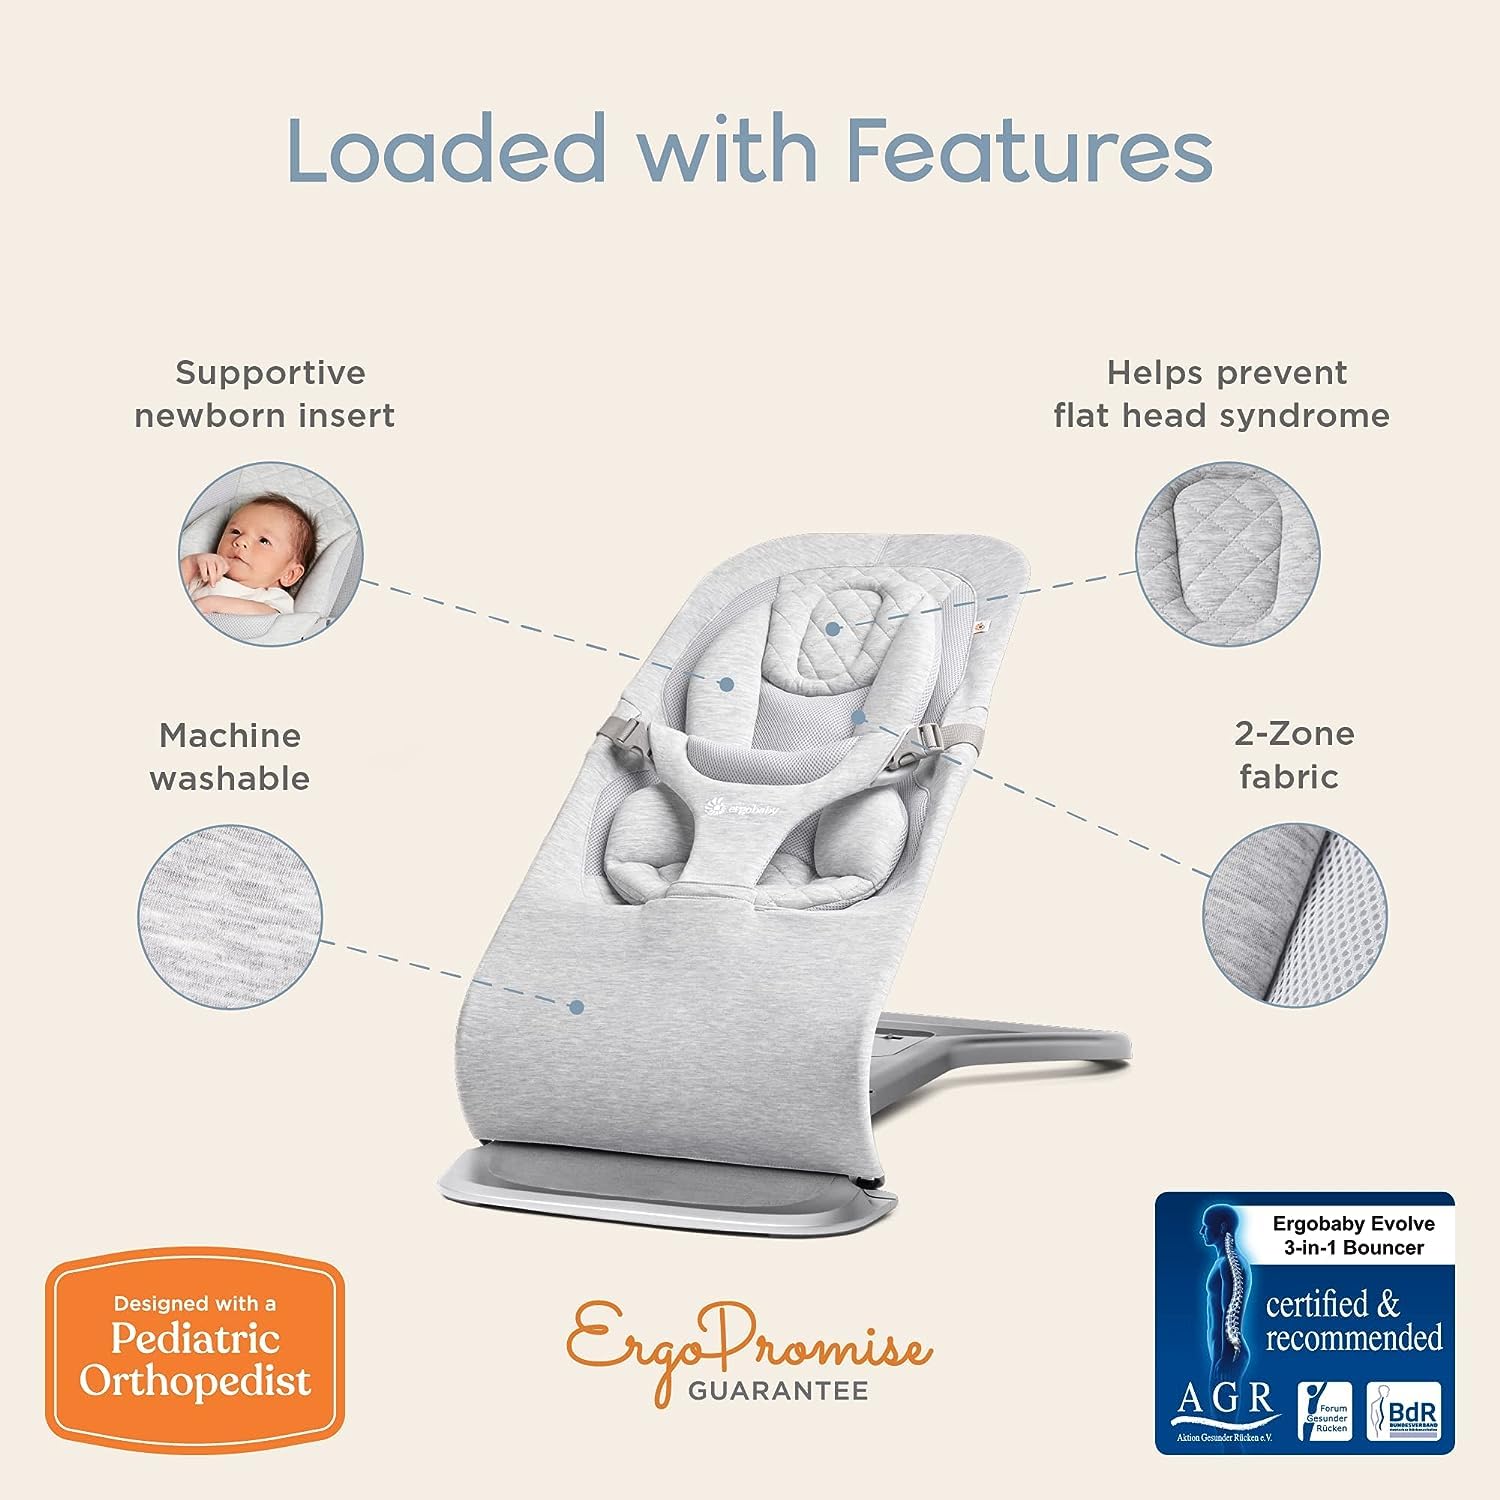 Ergobaby Evolve 3-in-1 Bouncer, Adjustable Multi Position Baby Bouncer Seat, Fits Newborn to Toddler, Onyx Black